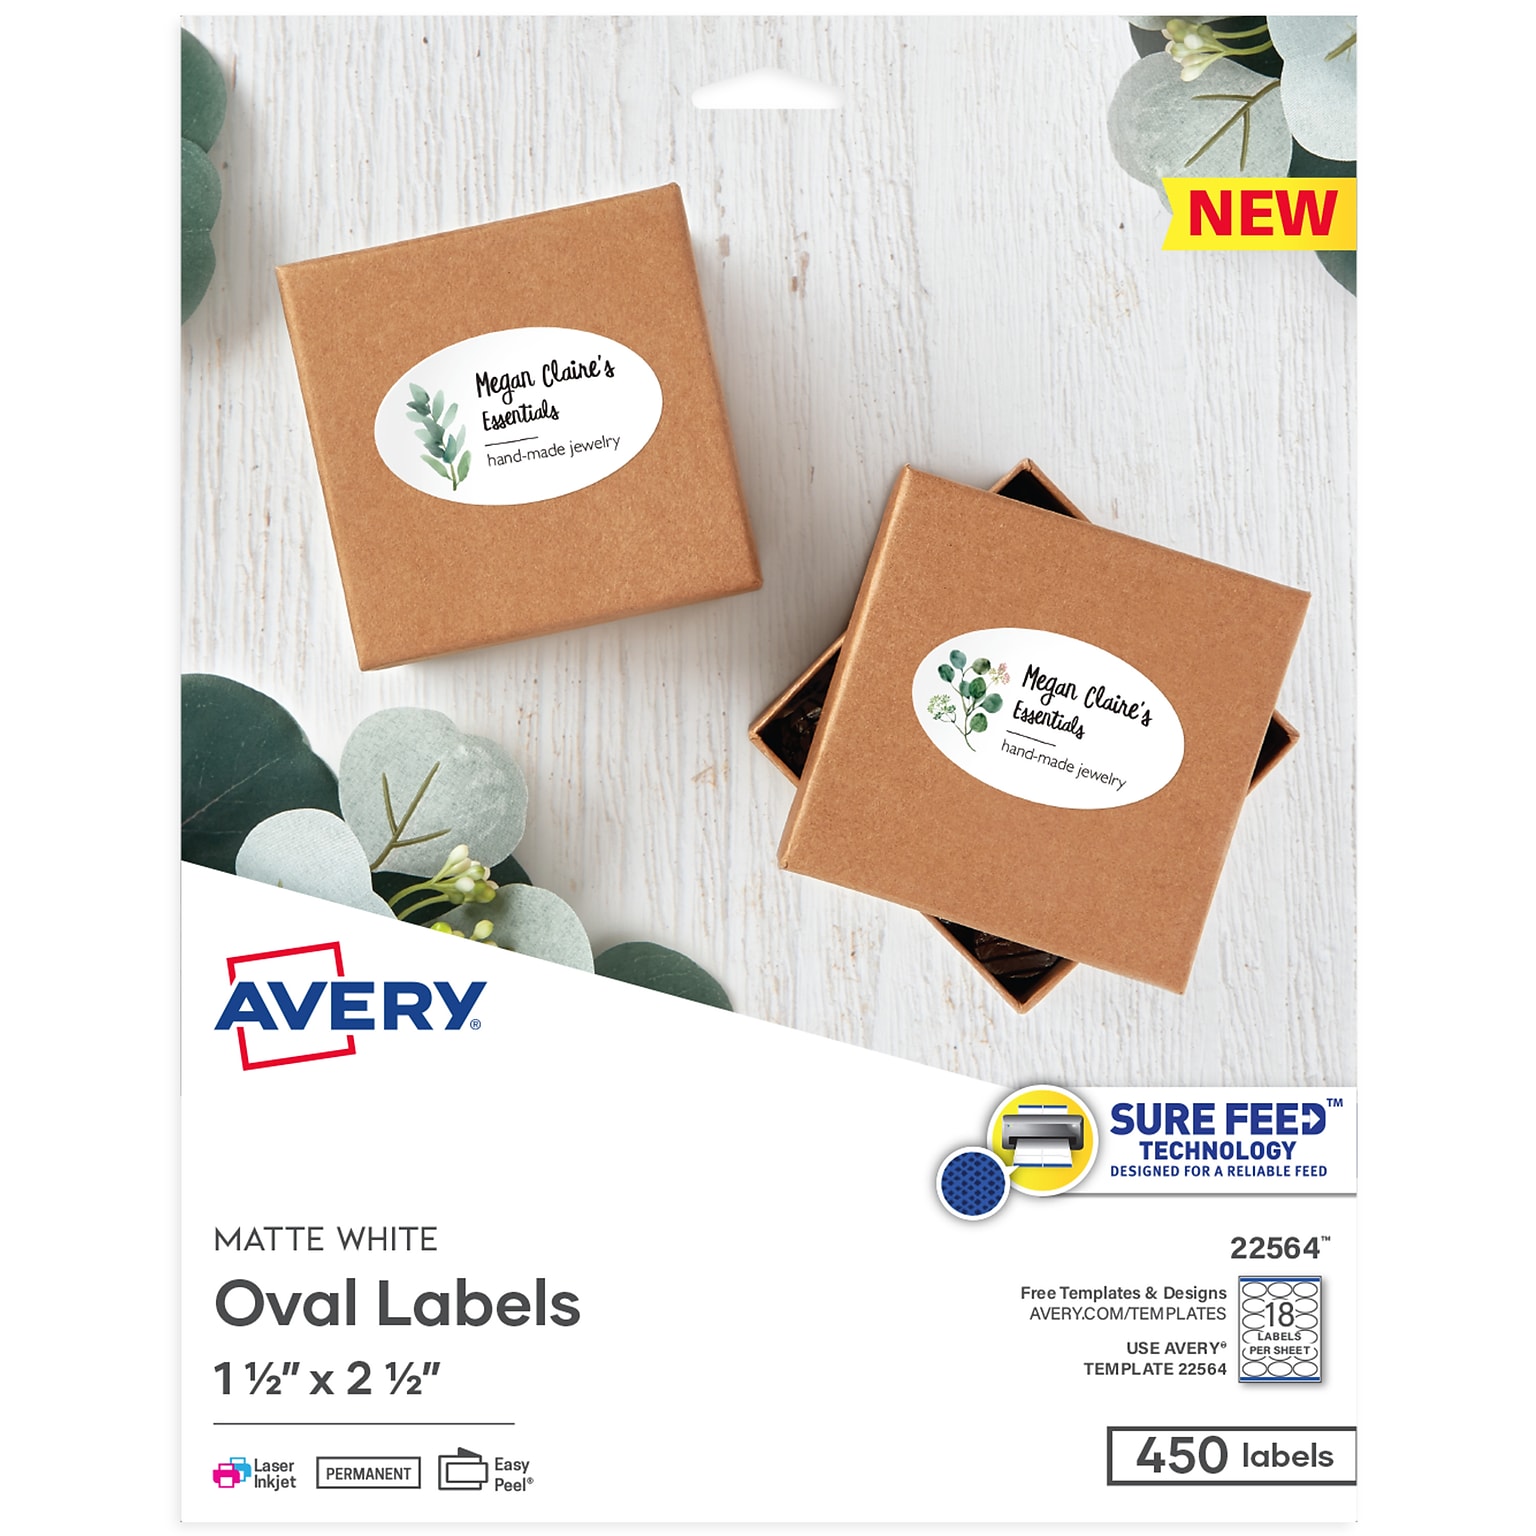 Avery Print-to-the-Edge Laser/Inkjet Labels, 1 1/2 x 2 1/2, White, 18 Labels/Sheet, 25 Sheets/Pack, 450 Labels/Pack (22564)